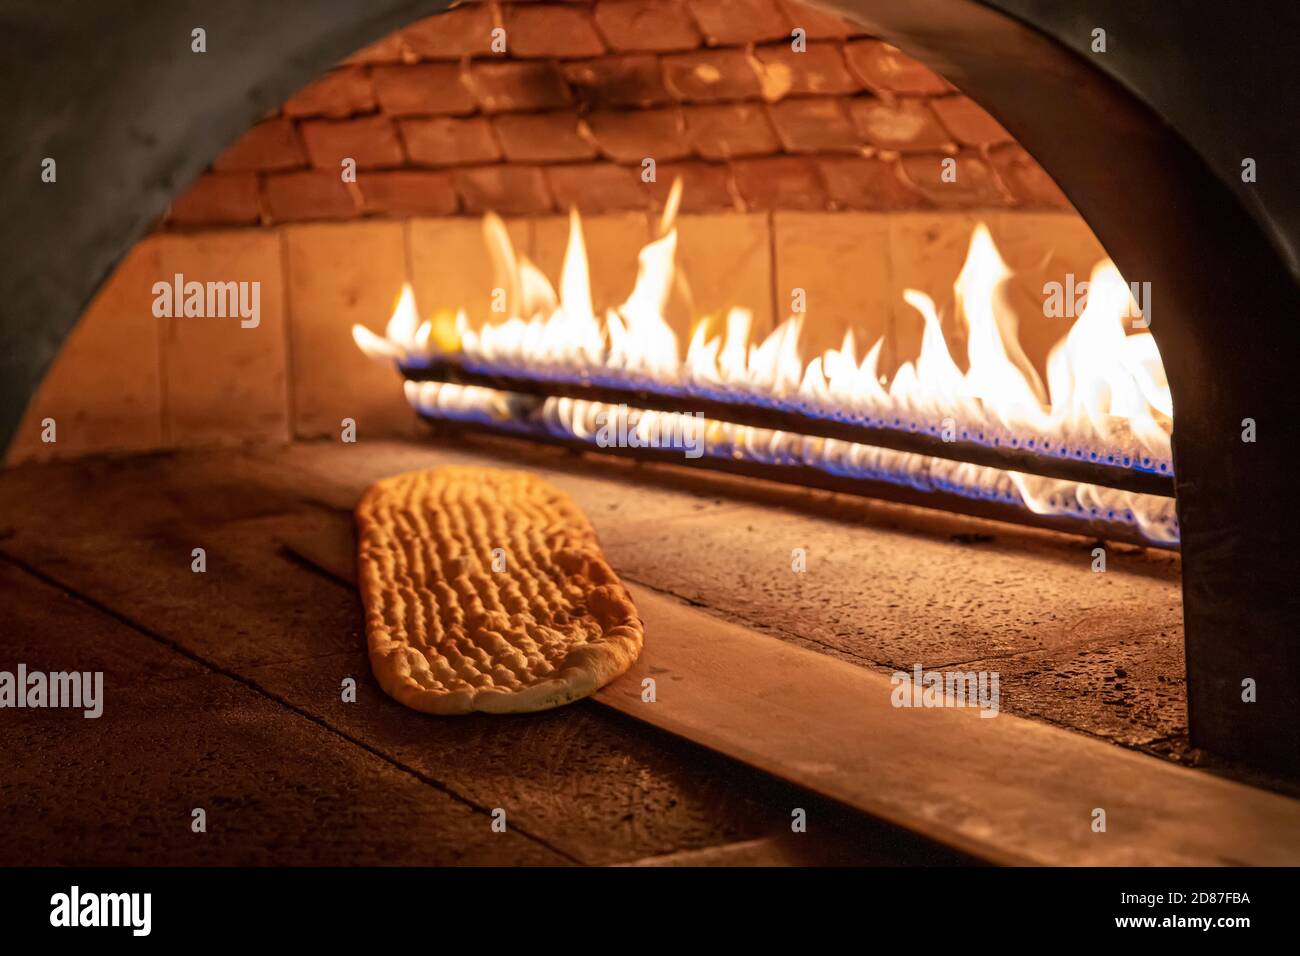 https://c8.alamy.com/comp/2D87FBA/turkish-cuisine-pita-bread-in-stone-brick-natural-flame-oven-on-wooden-board-fresh-hot-baked-loaf-copy-space-bakery-or-bakehouse-concept-image-2D87FBA.jpg